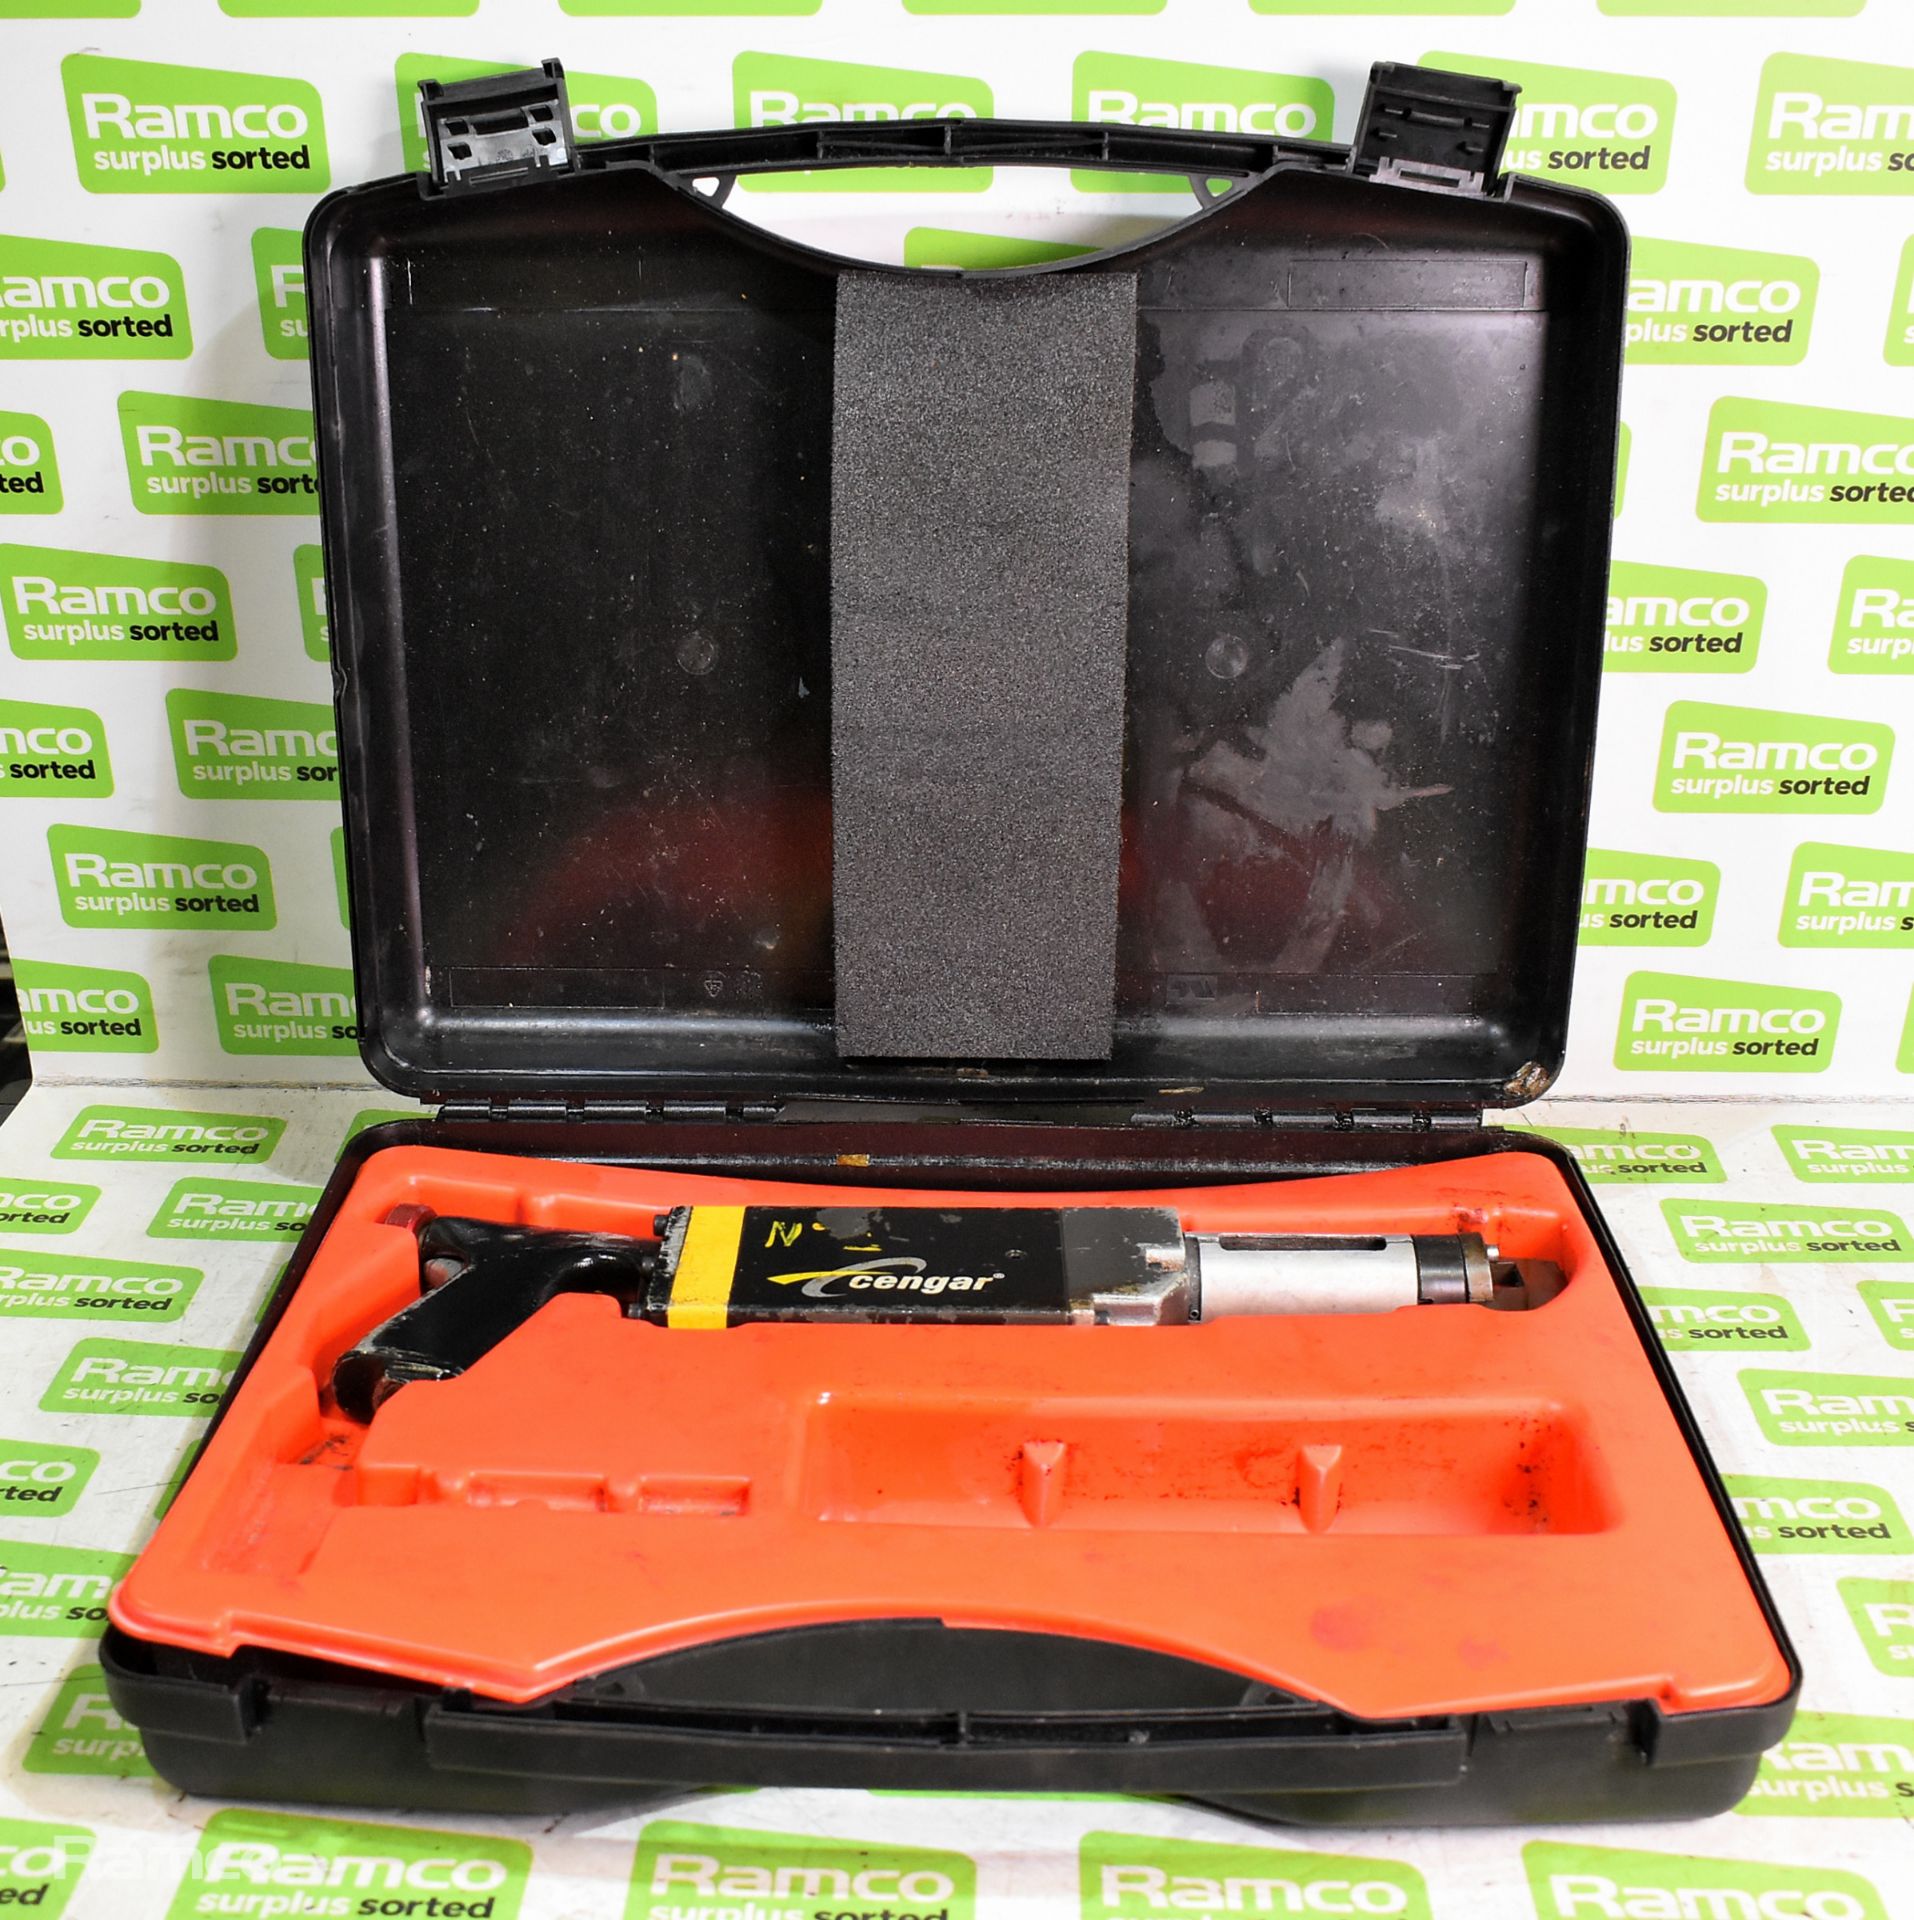 Cengar CL 50/75 pneumatic reciprocating saw in plastic case - Image 2 of 7